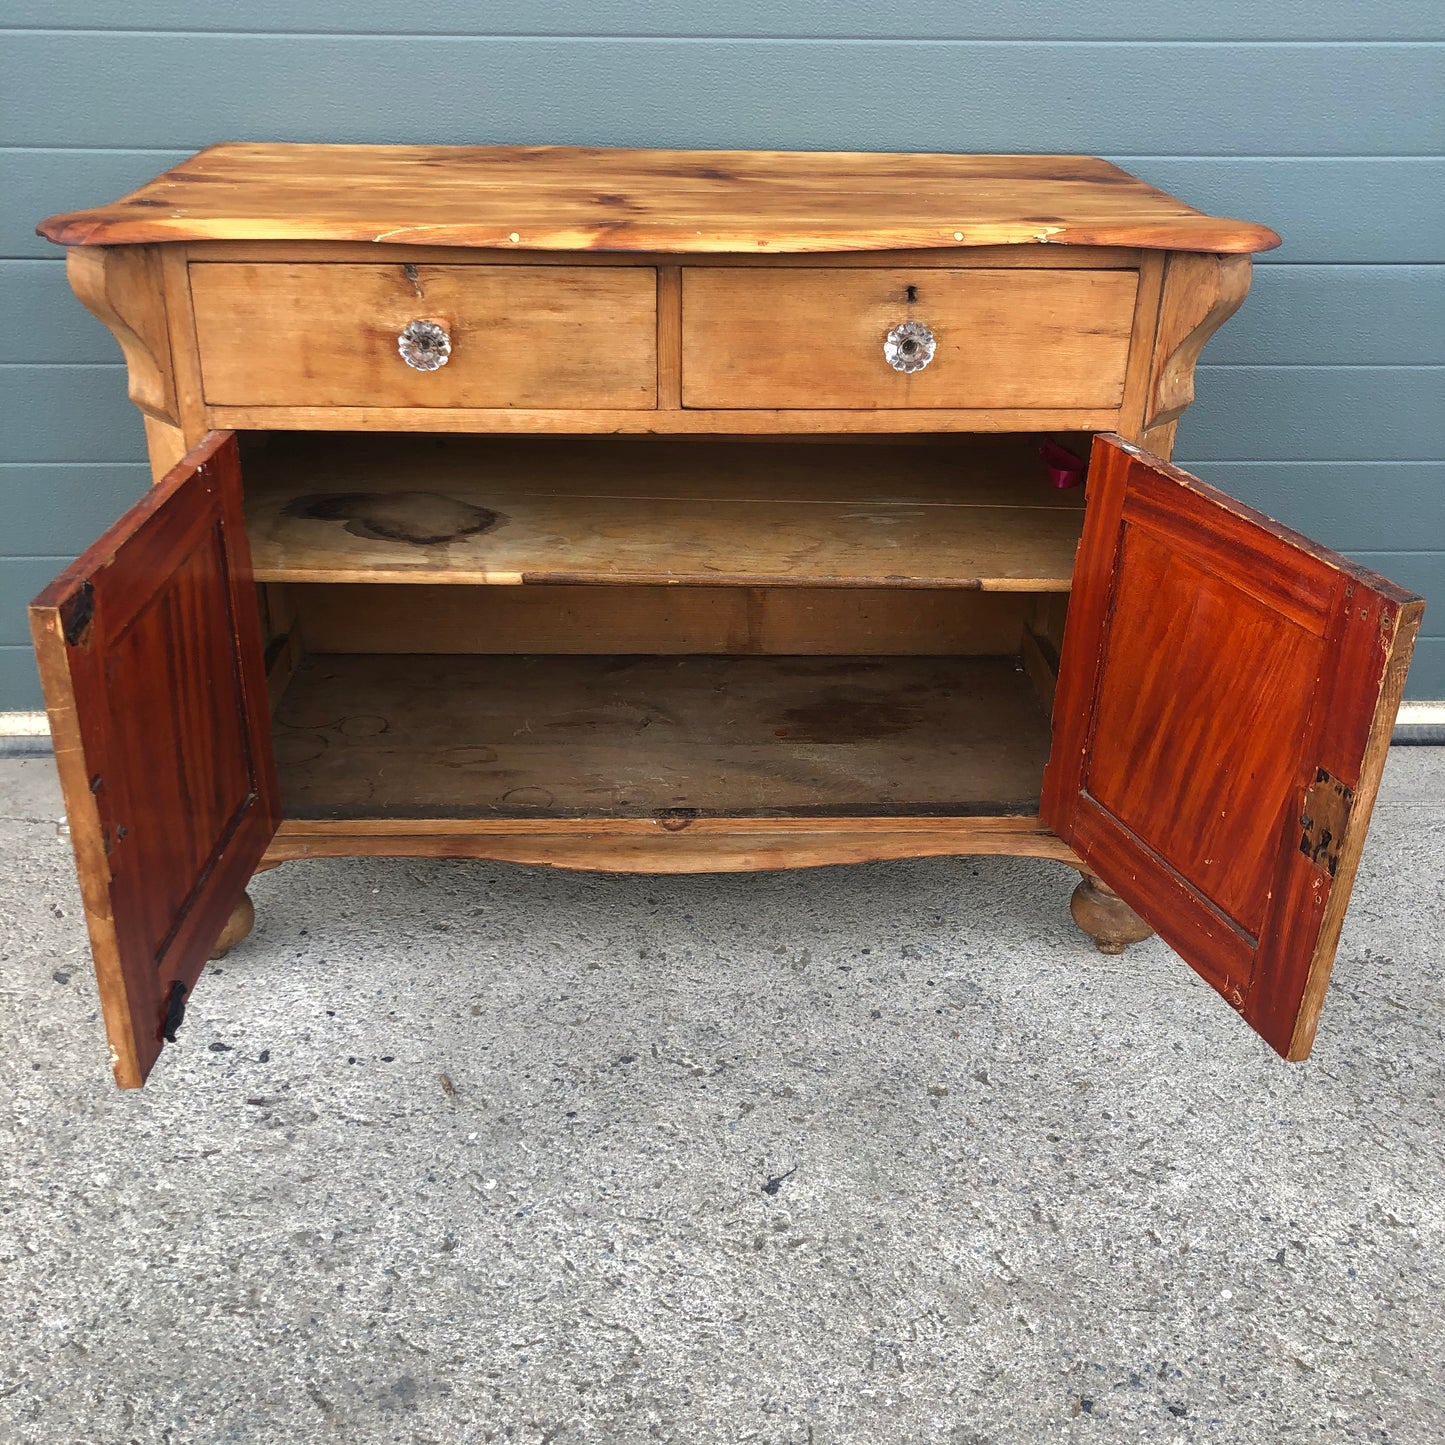 Antique Small Pine Sideboard / Stripped Pine Cupboard ( SOLD )